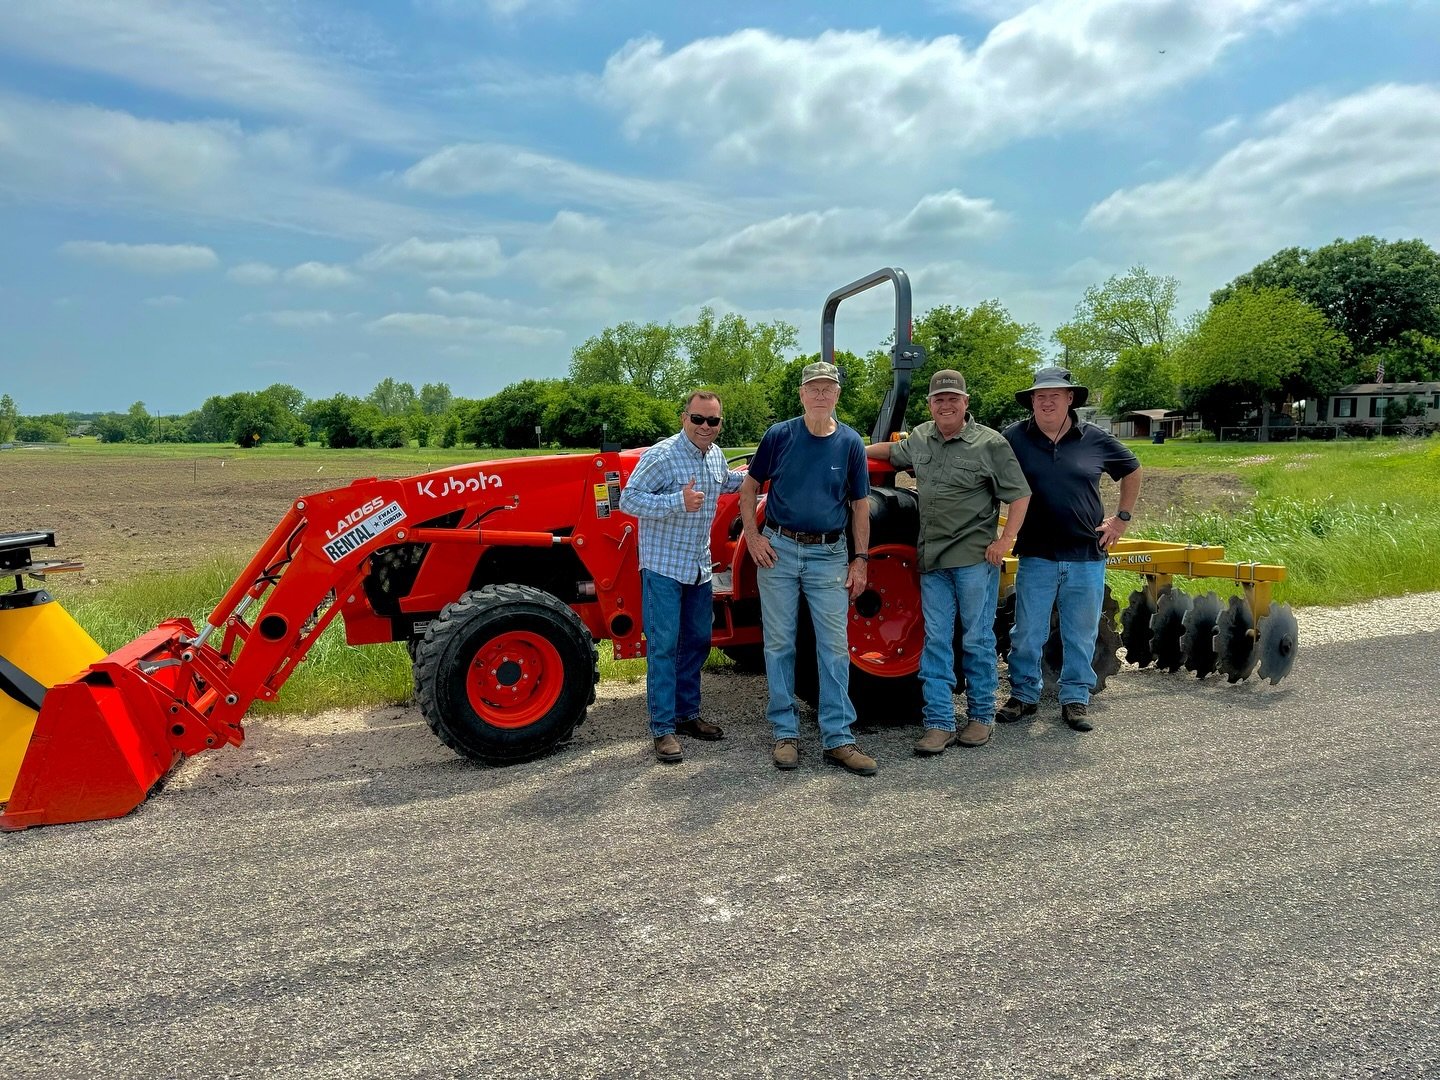 Meet the incredible team behind our BiG sunflower project! 🌻

A huge thank you to our amazing sunflower farmers: Jim, Bob, Dwayne, Paul, and Ewald Tractor! With their dedication and hard work, we&rsquo;re planting the seeds of golden futures. In jus